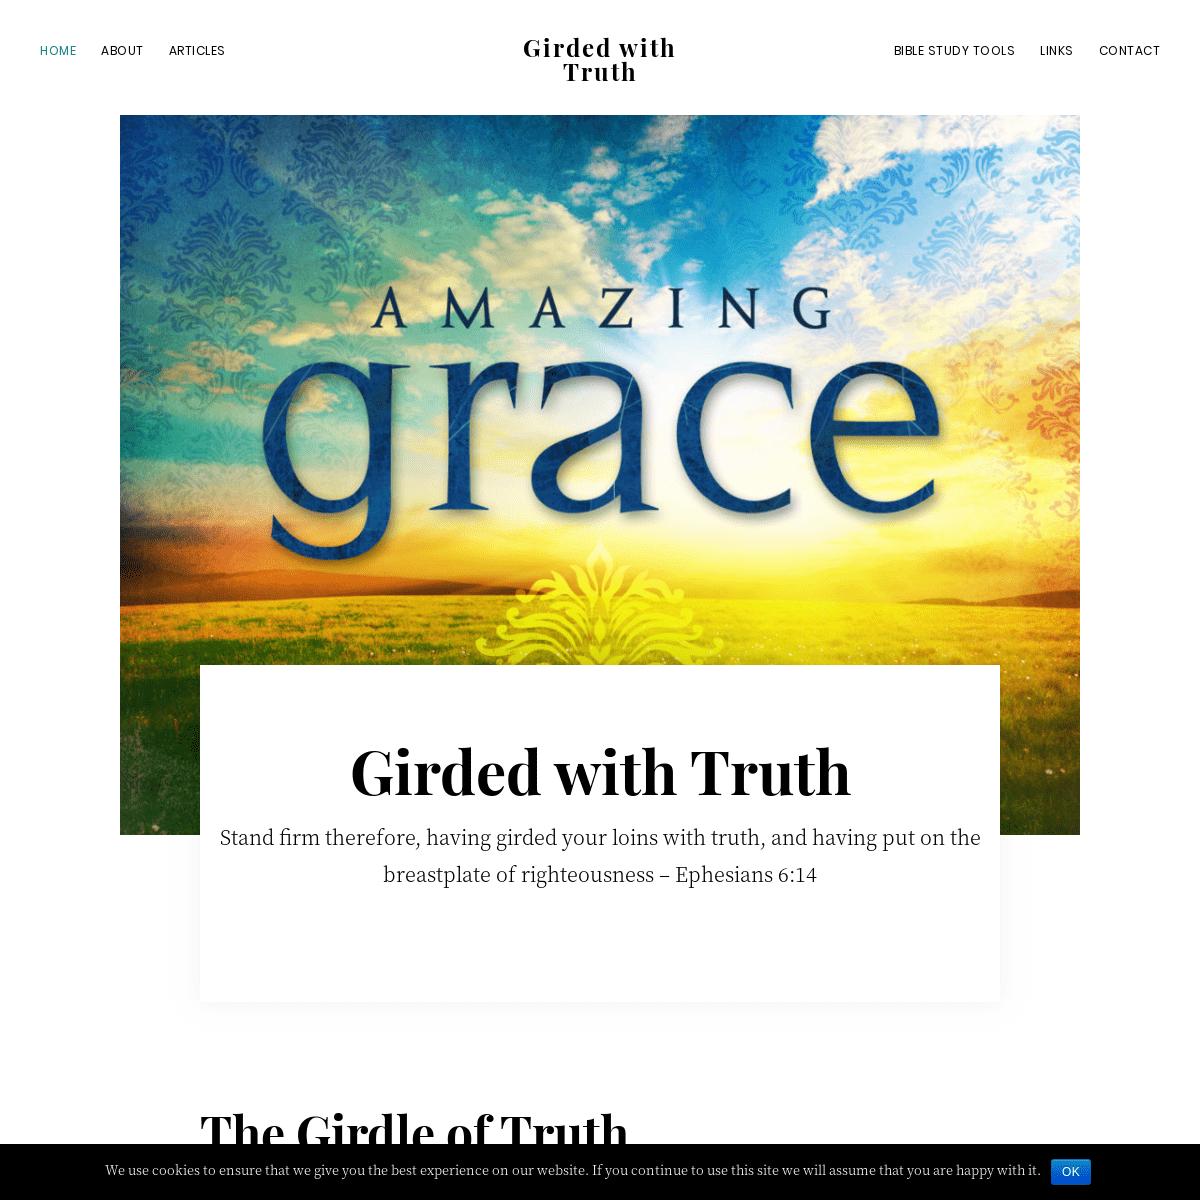 A complete backup of girdedwithtruth.org